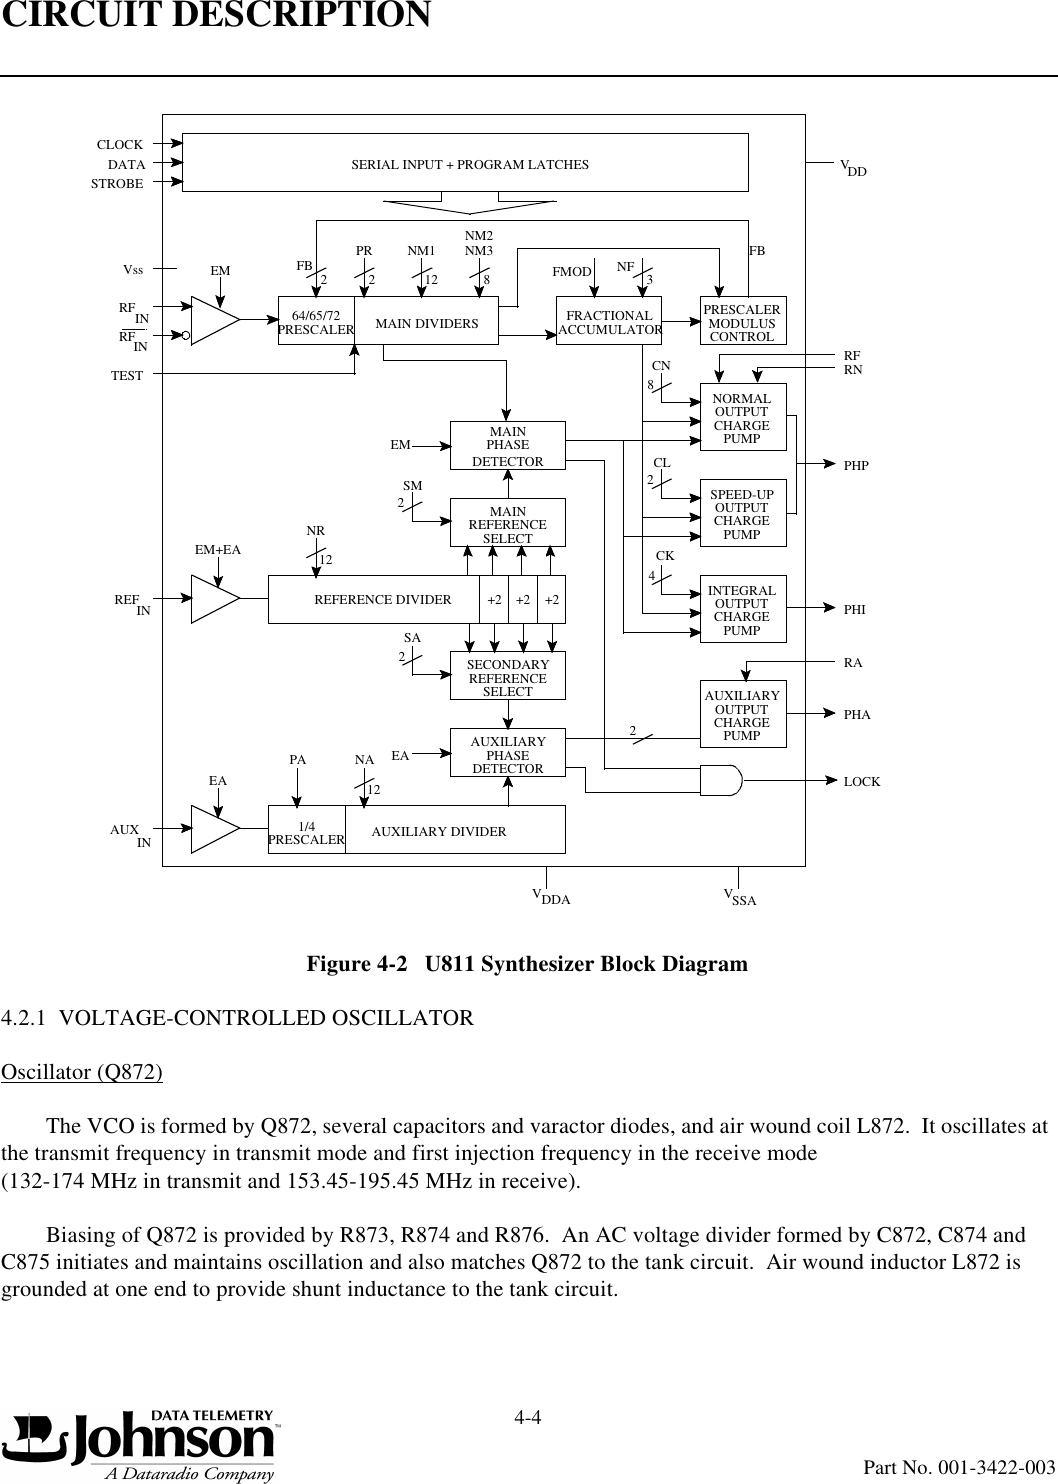 CIRCUIT DESCRIPTION4-4Part No. 001-3422-003Figure 4-2   U811 Synthesizer Block Diagram4.2.1  VOLTAGE-CONTROLLED OSCILLATOROscillator (Q872)The VCO is formed by Q872, several capacitors and varactor diodes, and air wound coil L872.  It oscillates at the transmit frequency in transmit mode and first injection frequency in the receive mode (132-174 MHz in transmit and 153.45-195.45 MHz in receive).Biasing of Q872 is provided by R873, R874 and R876.  An AC voltage divider formed by C872, C874 and C875 initiates and maintains oscillation and also matches Q872 to the tank circuit.  Air wound inductor L872 is grounded at one end to provide shunt inductance to the tank circuit.CLOCKDATASTROBEVssRFINRFIN64/65/72PRESCALER MAIN DIVIDERSEM FB 2 2 12 8PR NM1 NM3NM2FRACTIONALACCUMULATORPRESCALERMODULUSCONTROL3FMOD NF FBSERIAL INPUT + PROGRAM LATCHES VDDTESTINREFEM+EAREFERENCE DIVIDER +2 +2 +2MAINMAINPHASEDETECTORREFERENCESELECT2SMEMREFERENCESELECT2SASECONDARYPHASEDETECTOREA AUXILIARYINEAAUX12NR12NAPAAUXILIARY DIVIDERPRESCALER1/4NORMALOUTPUTCHARGEPUMPOUTPUTCHARGEPUMPSPEED-UPOUTPUTCHARGEPUMPINTEGRALOUTPUTCHARGEPUMPAUXILIARYCN8CL2CK42VSSAVDDALOCKPHARAPHIPHPRNRF